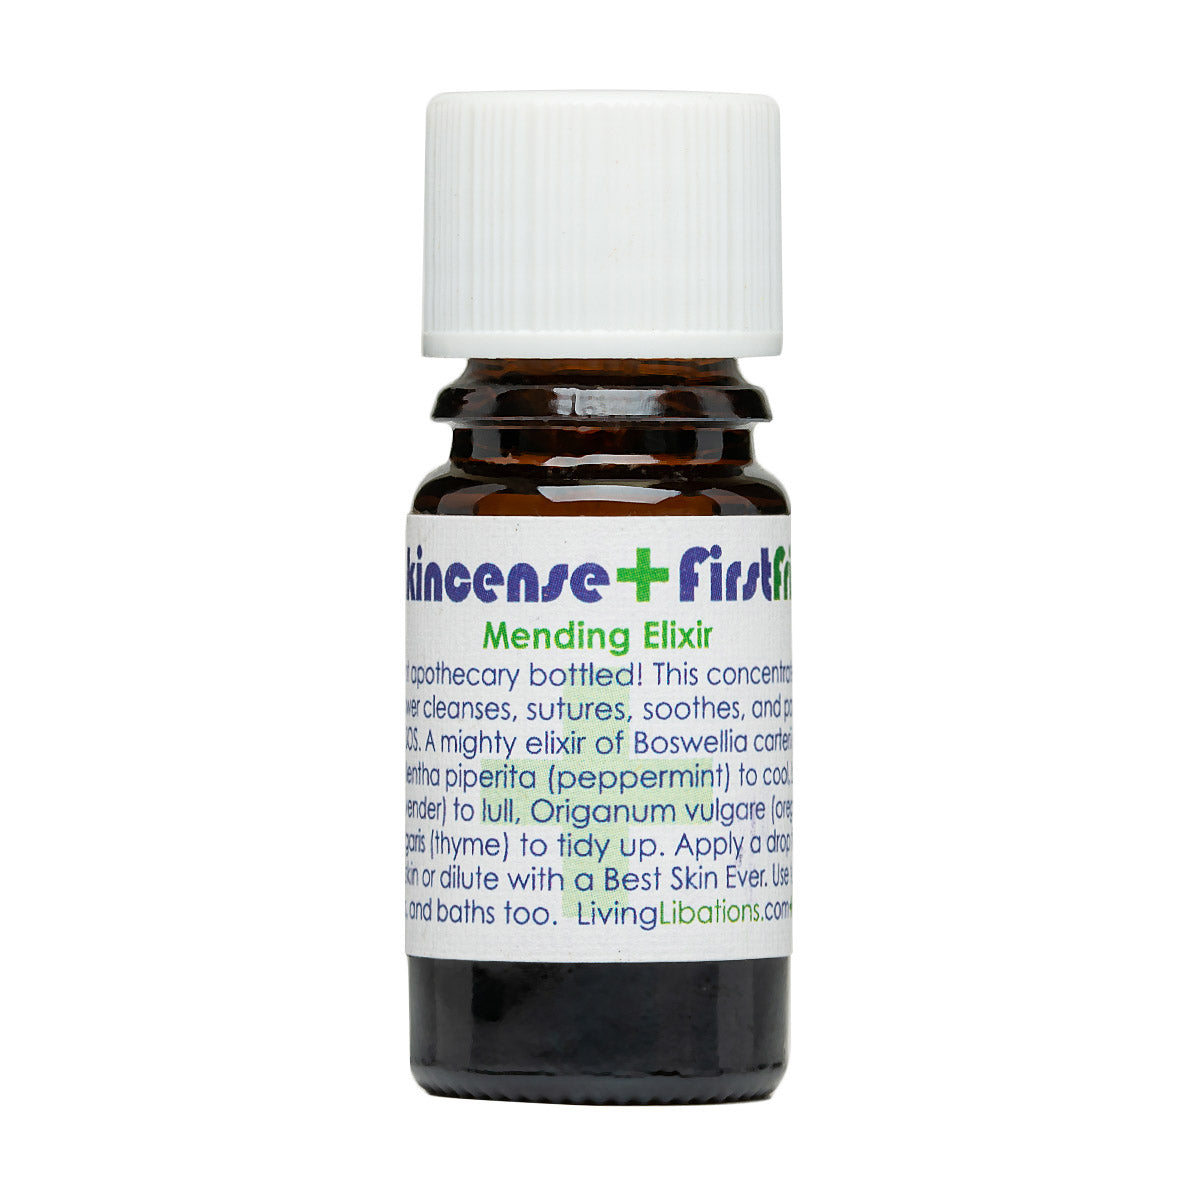 Frankincense First Friend | Living Libations | Raw Living UK | Health Nectar | Living Libations Frankincense FirstAid (5ml) combines the most potent anti-fungal, anti-bacterial &amp; anti-inflammatory oils into a chrism of potential healing.